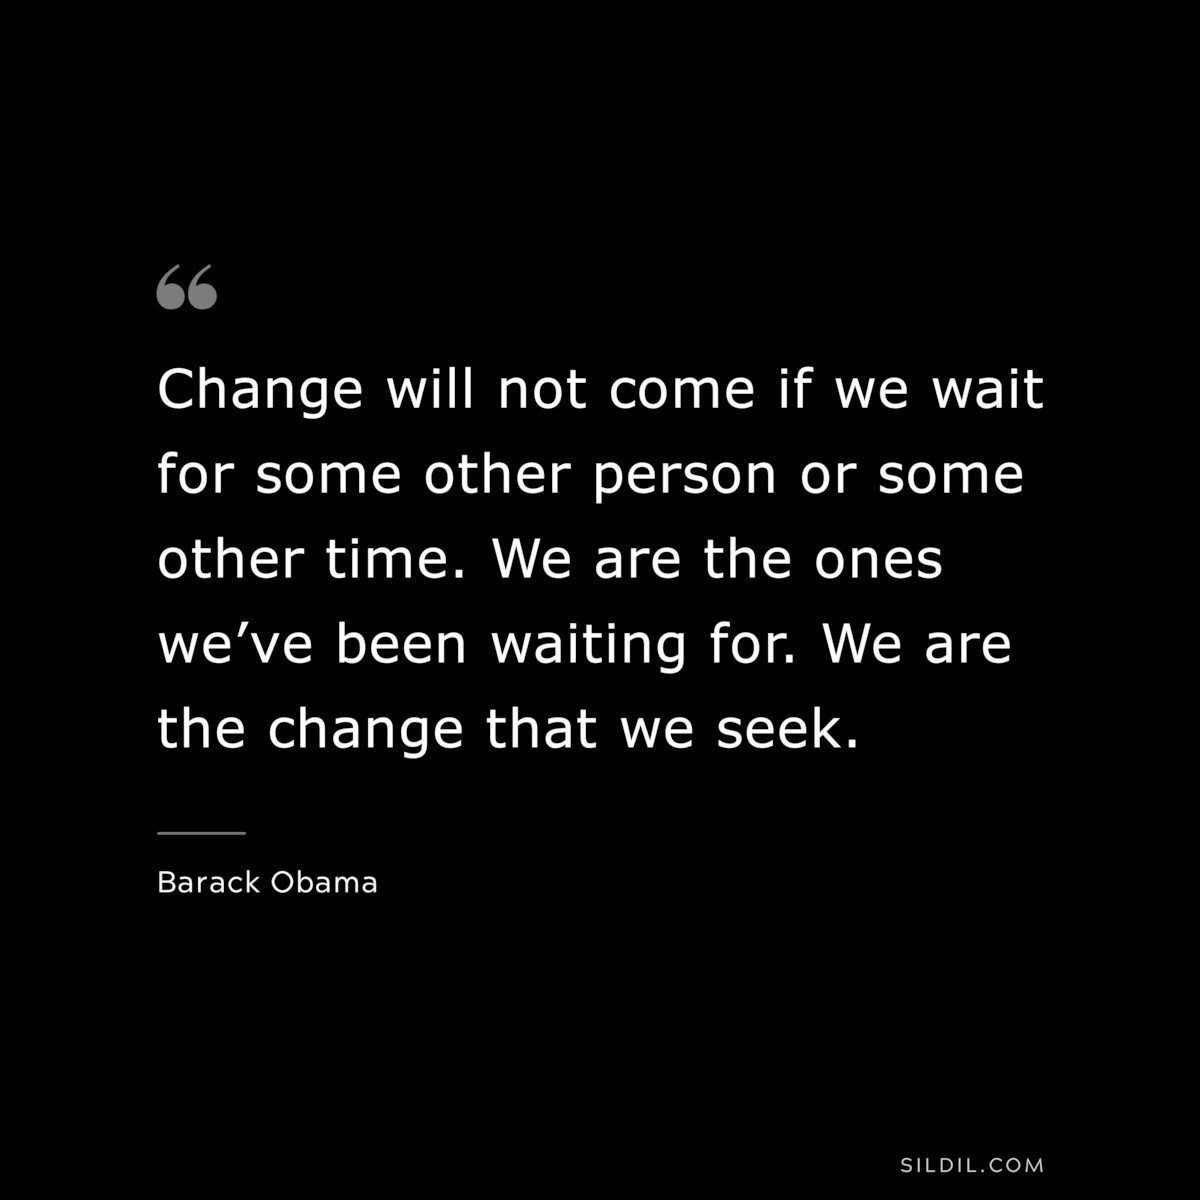 Change will not come if we wait for some other person or some other time. We are the ones we’ve been waiting for. We are the change that we seek. ― Barack Obama